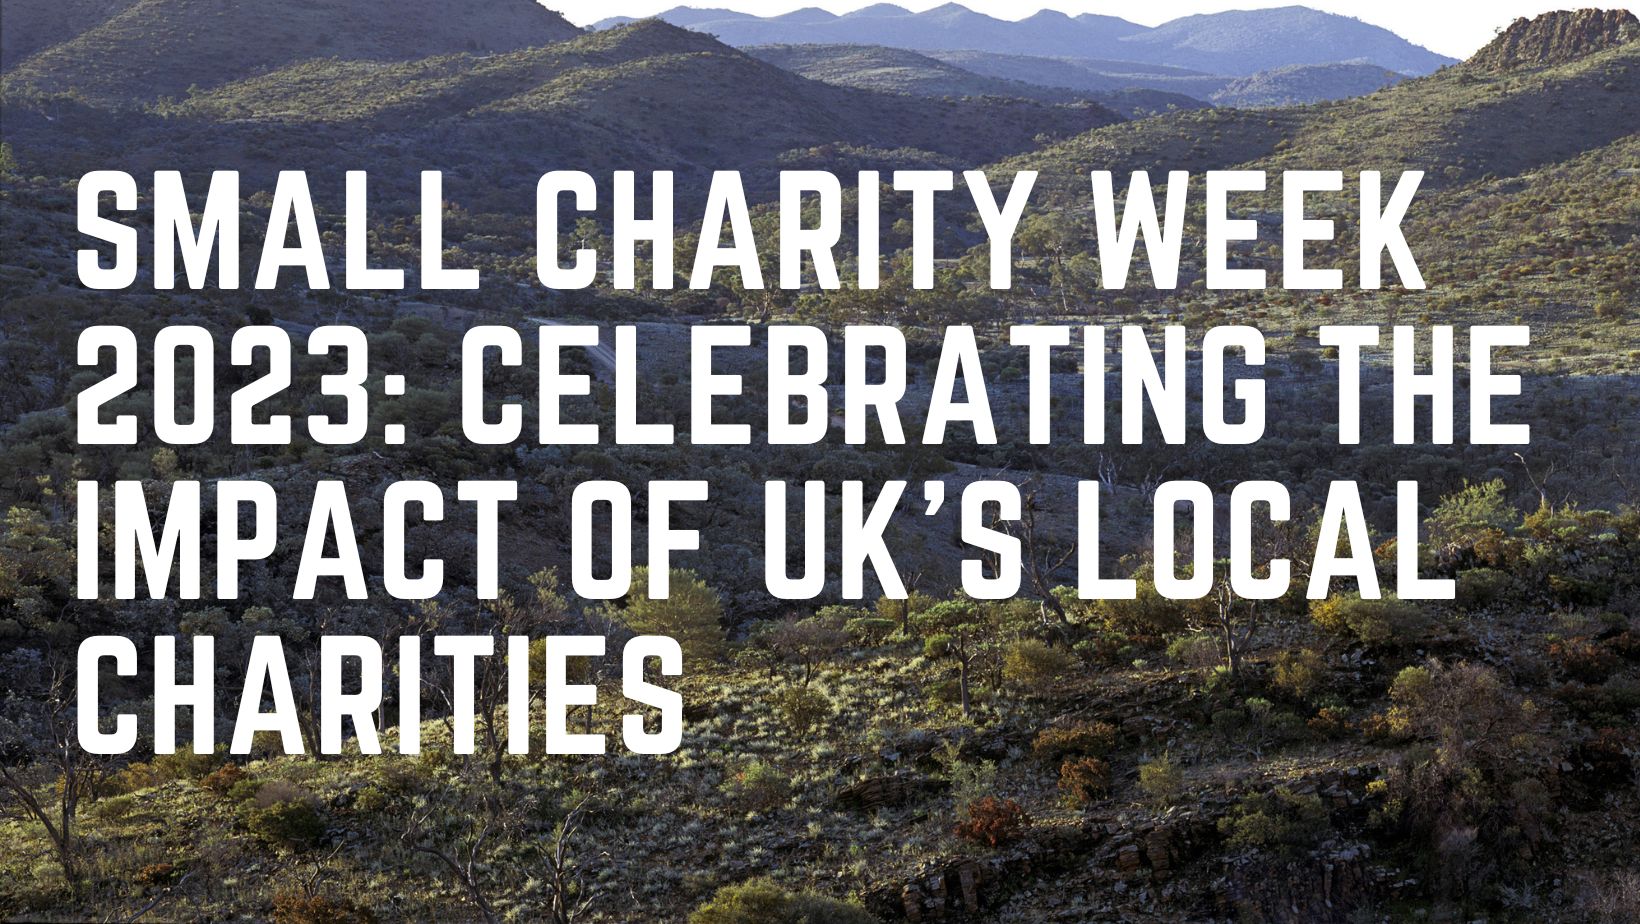 Small Charity Week 2023: Celebrating the Impact of UK's Local Charities